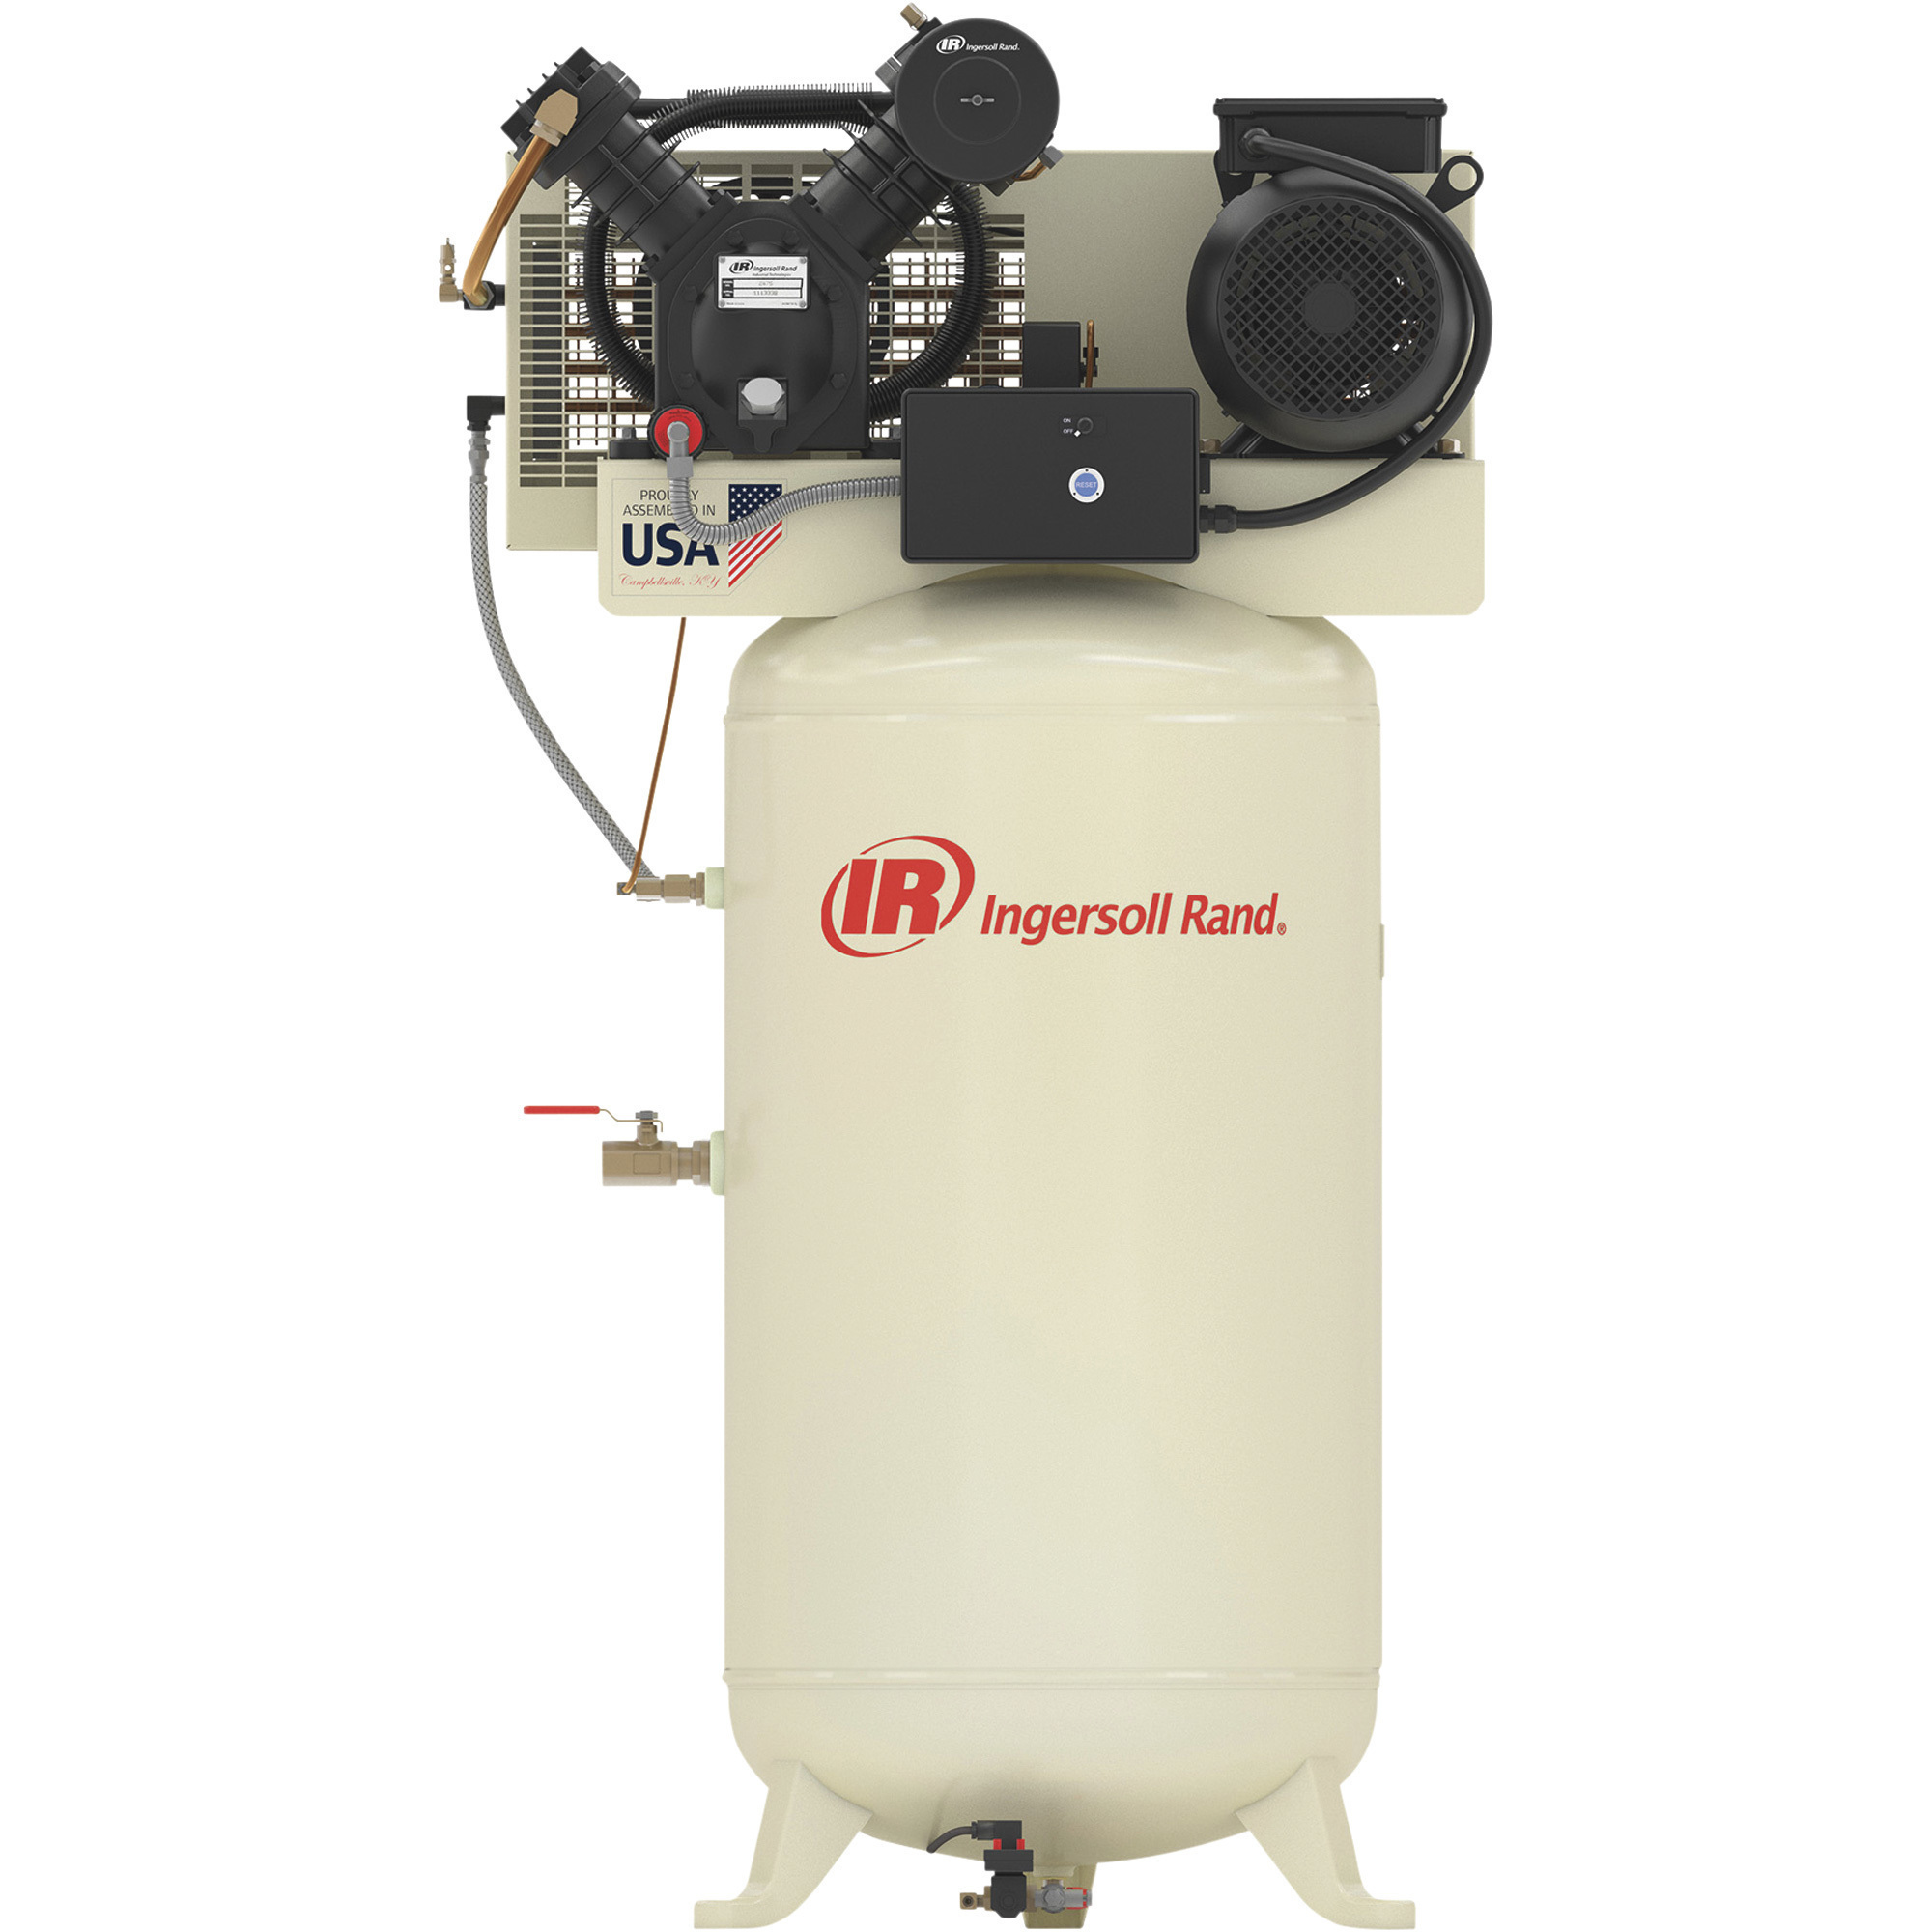 Ingersoll Rand Type-30 Reciprocating Air Compressor (Premium Package), 7.5 HP, 230 Volt, 3 Phase, 80 Gallon Vertical, Model 2475N7.5-P